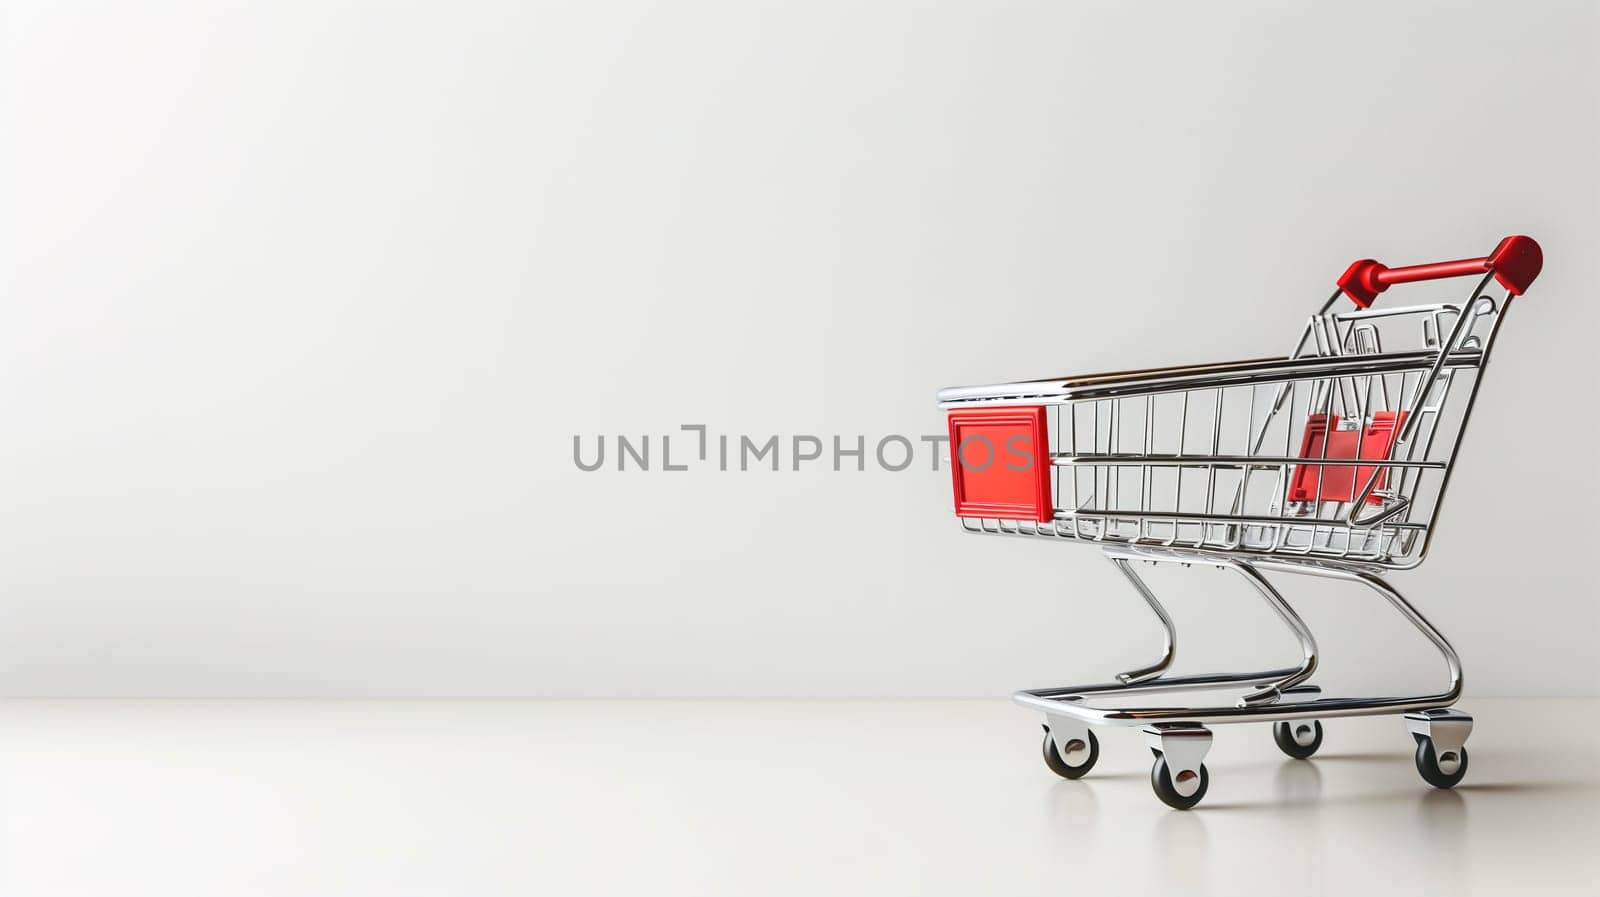 A small shopping cart with a red handle is shown against a plain background. The cart is empty, ready to be used for shopping. The red handle stands out prominently against the metal of the cart.